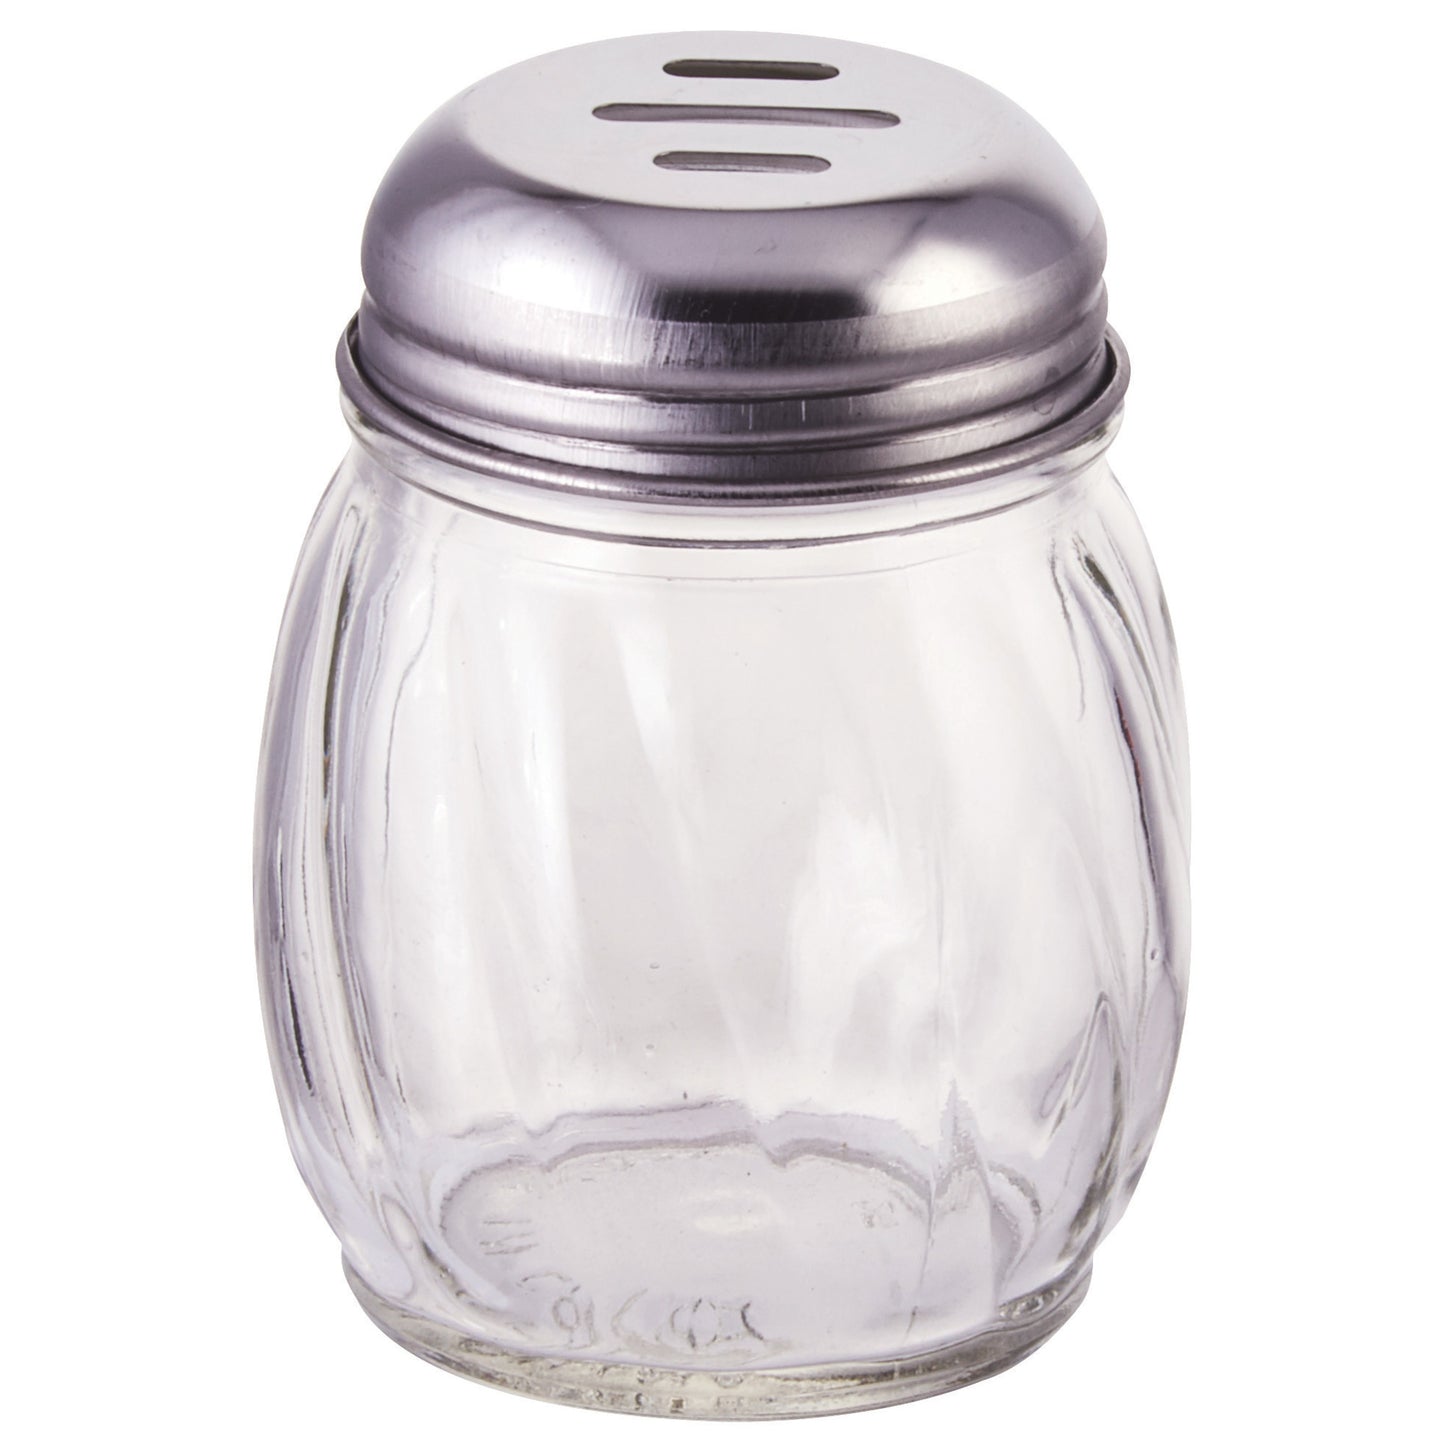 G-108 - Cheese Shakers, 6 oz - Slotted